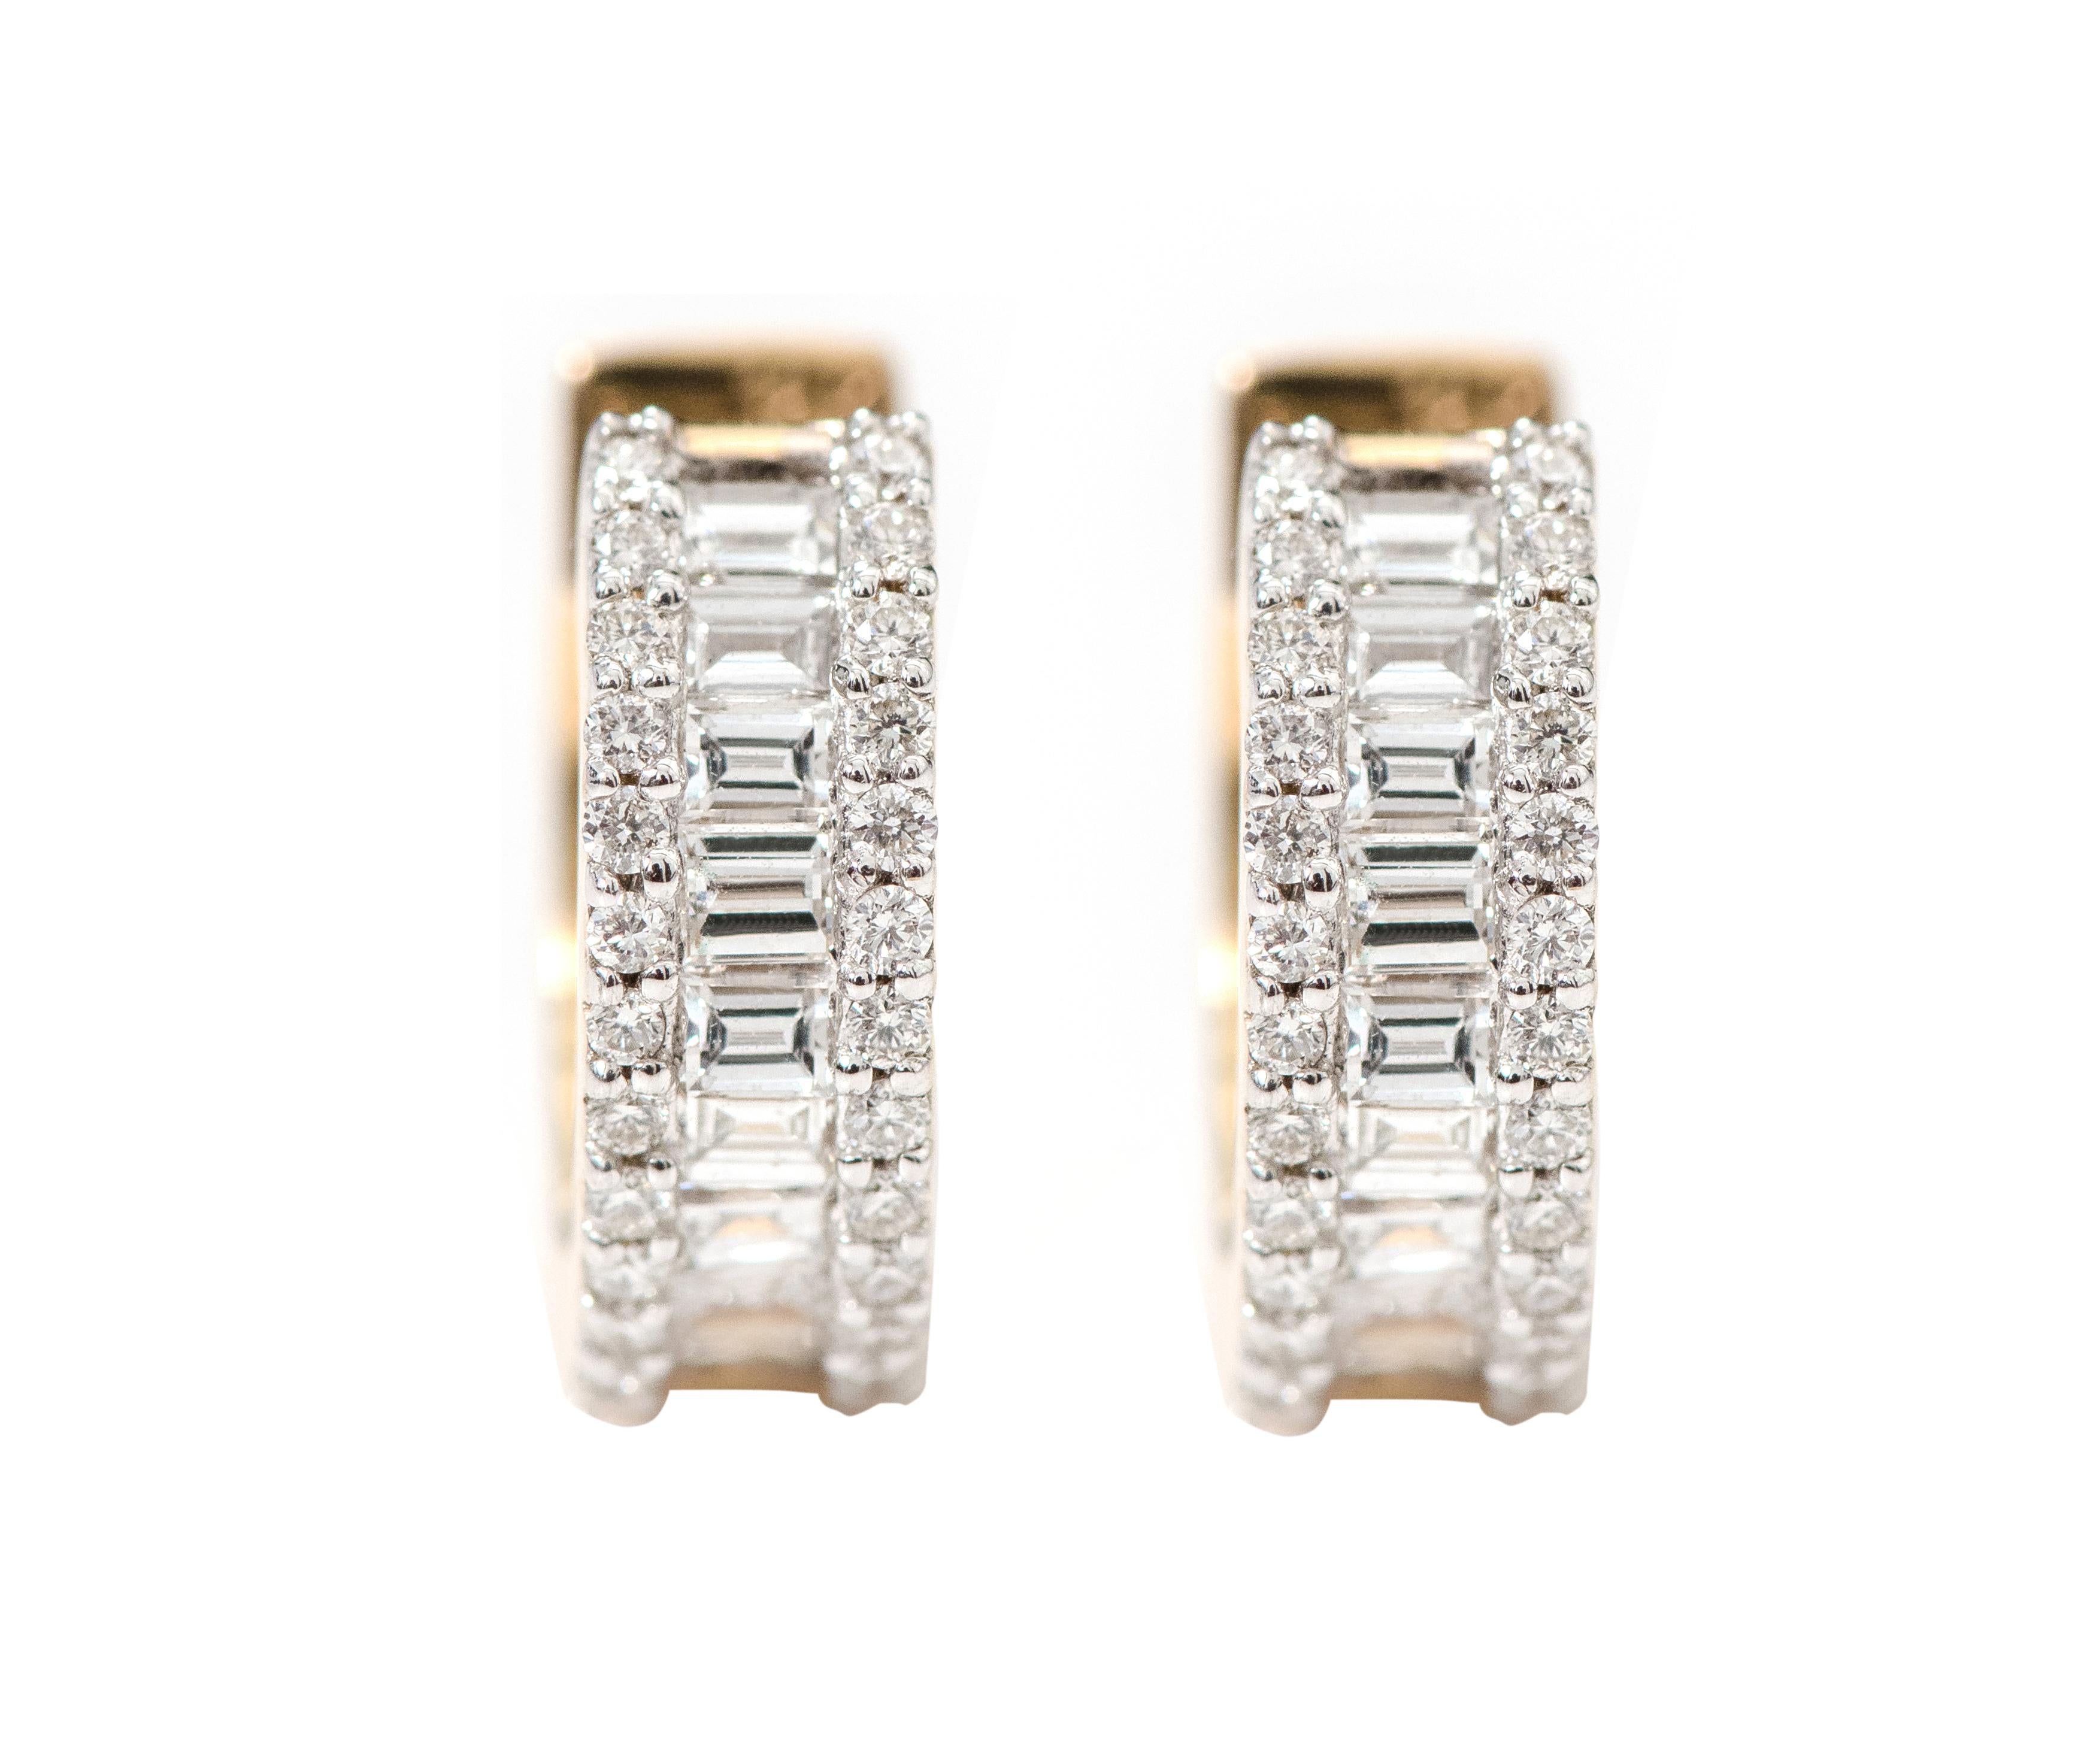 18 Karat Yellow Gold Diamond Huggie Mini-Hoop Earring
 
This exclusive diamond mini-hoop is exemplary. The perfectly cut and matched baguette-cut diamonds in a channel setting are incorporated within an equivalent layer of micro pave set diamonds on